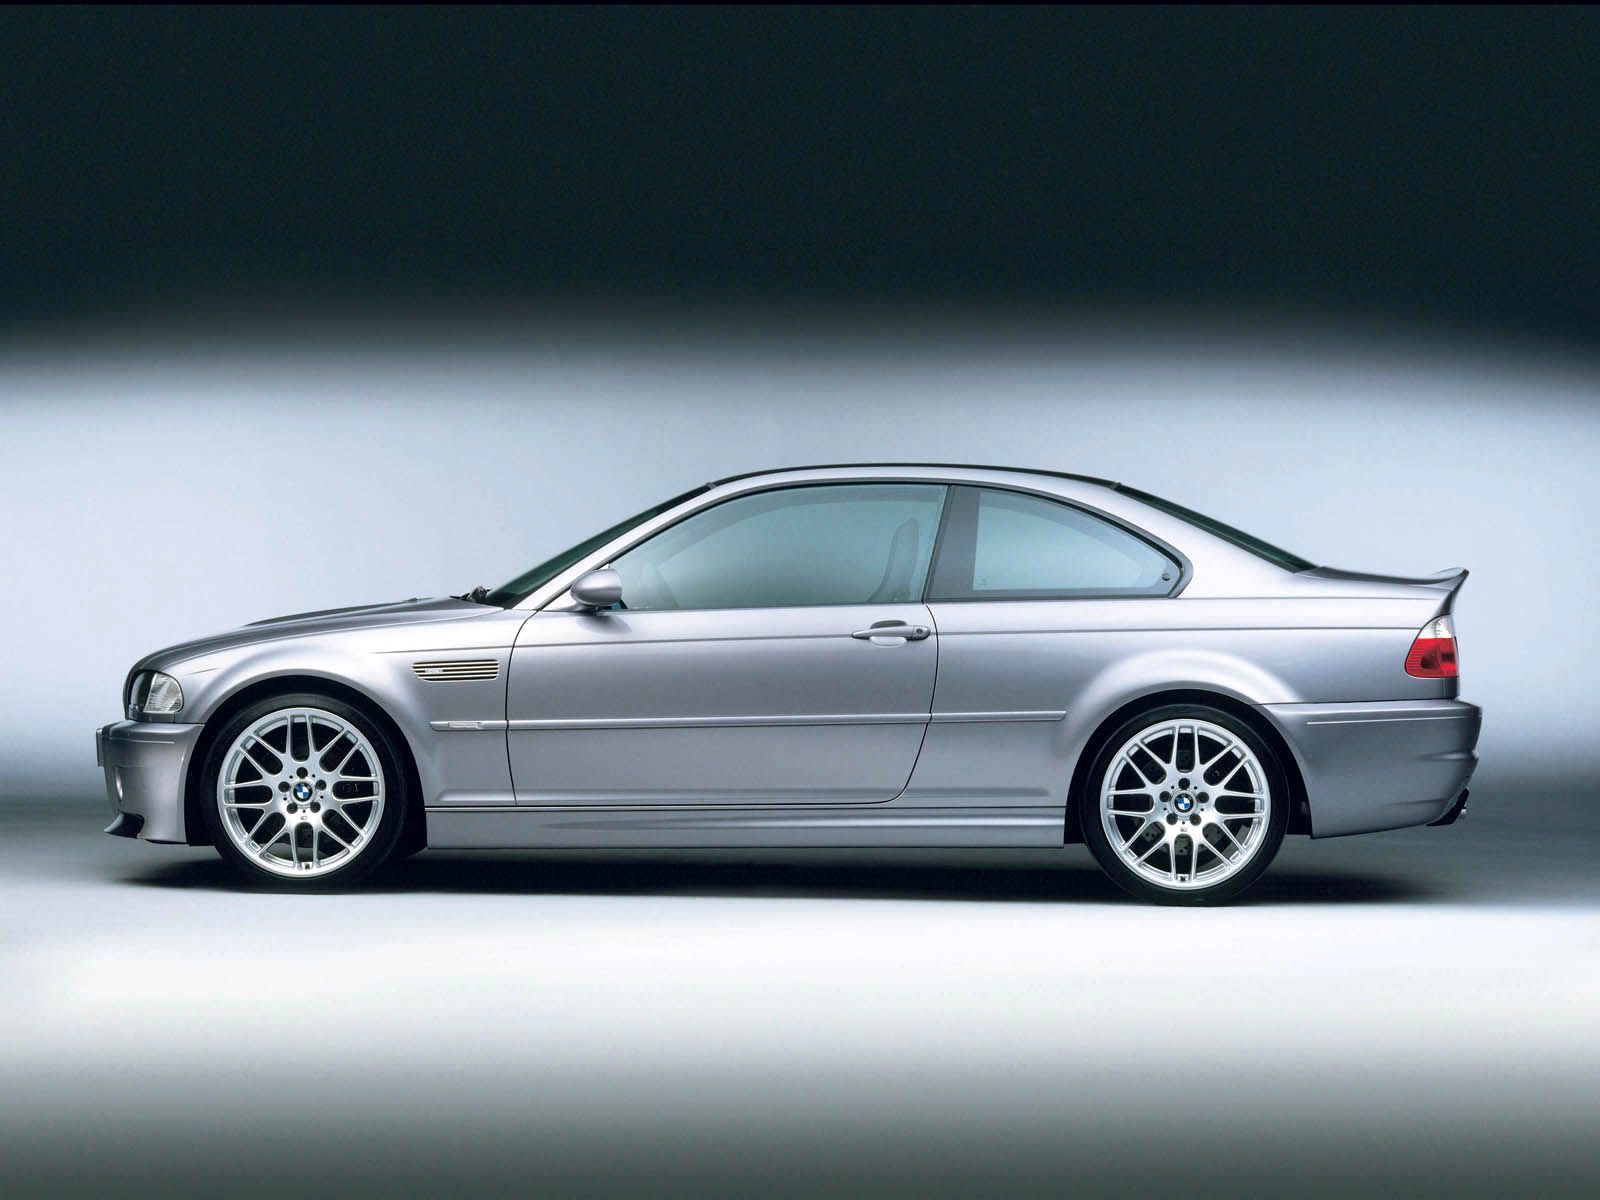 the related wallpapers of bmw m3 bmw m3 bmw m3 bmw m3